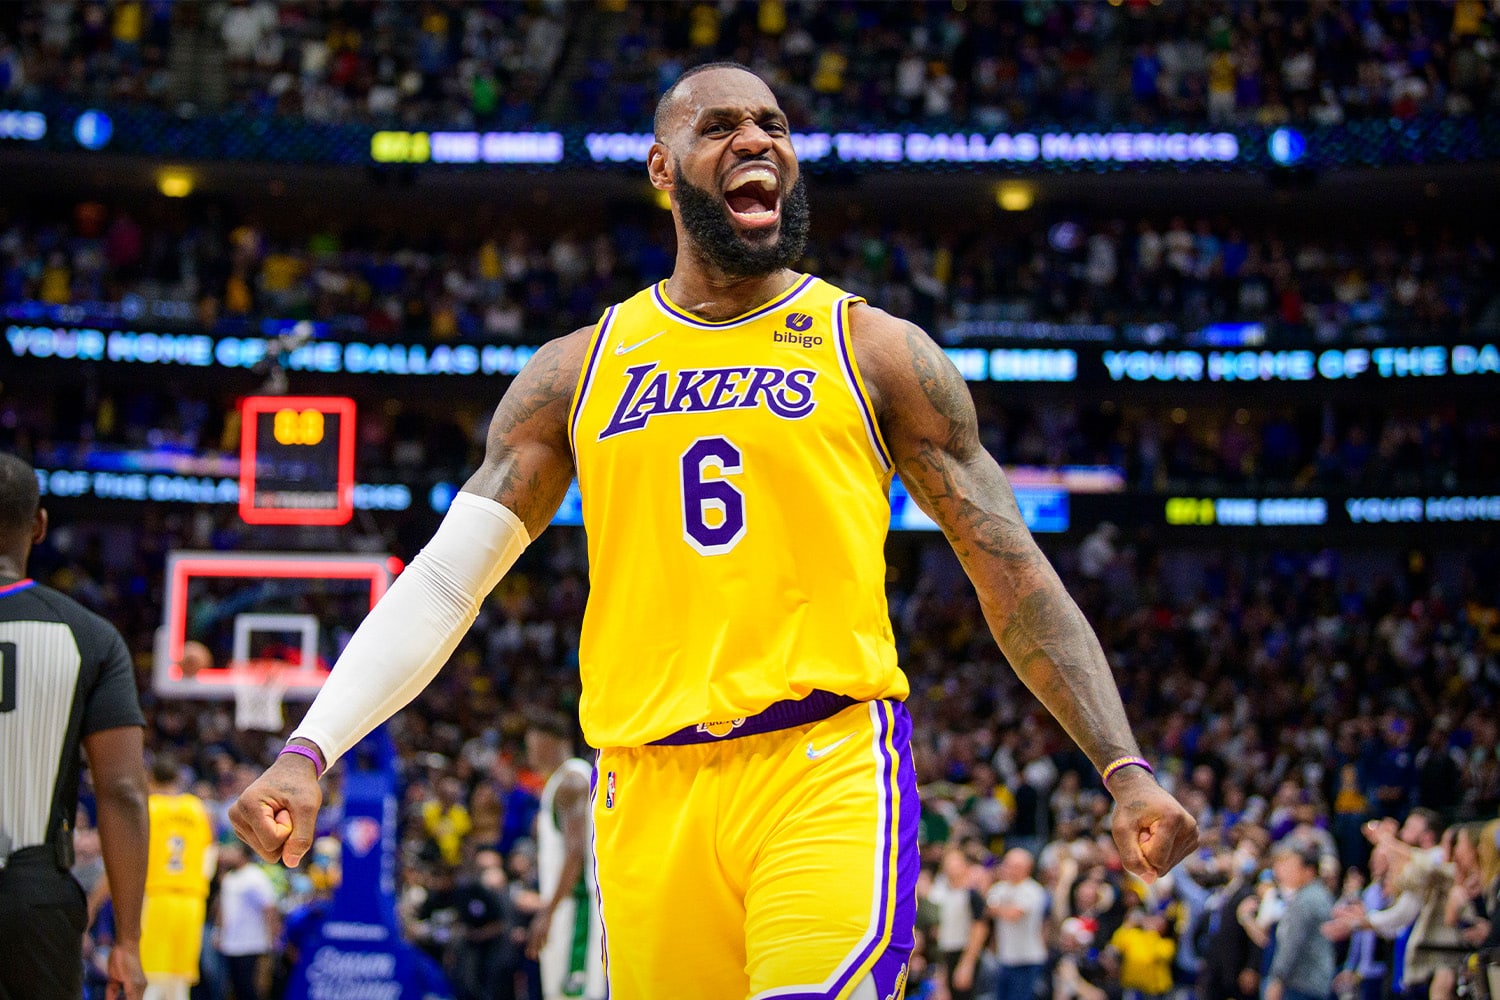 Lakers deal will make Lebron James highest career-earning NBA player